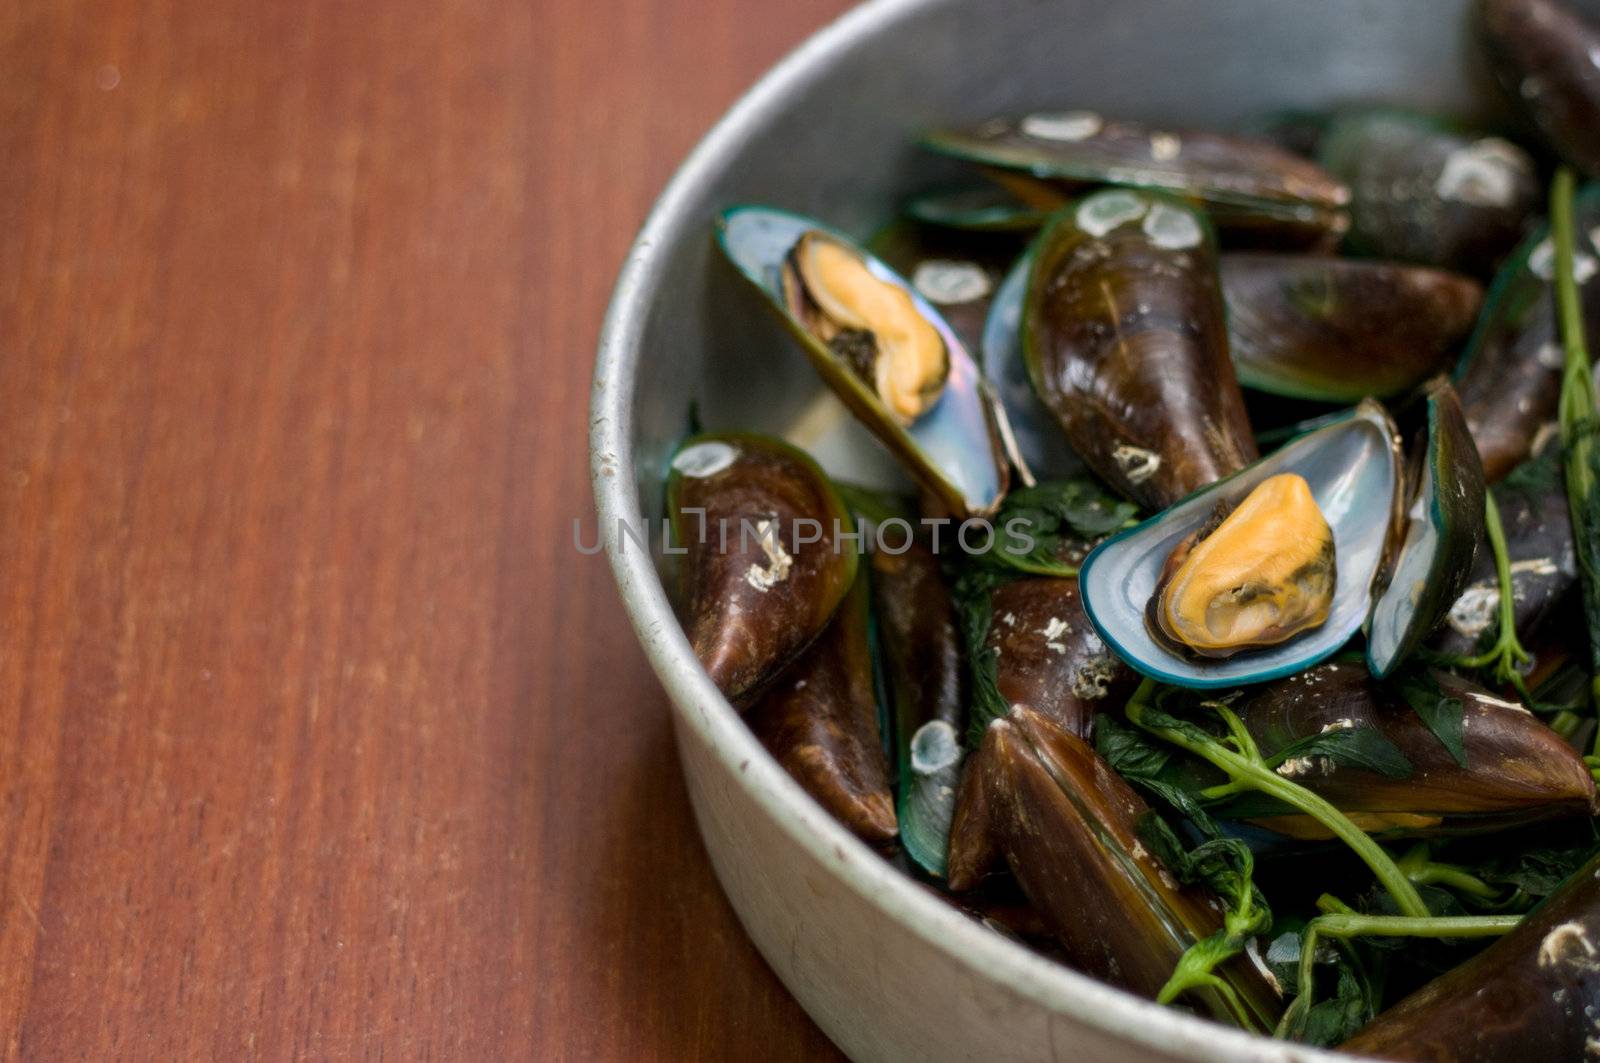 Boiled Asian green mussel on wooden table